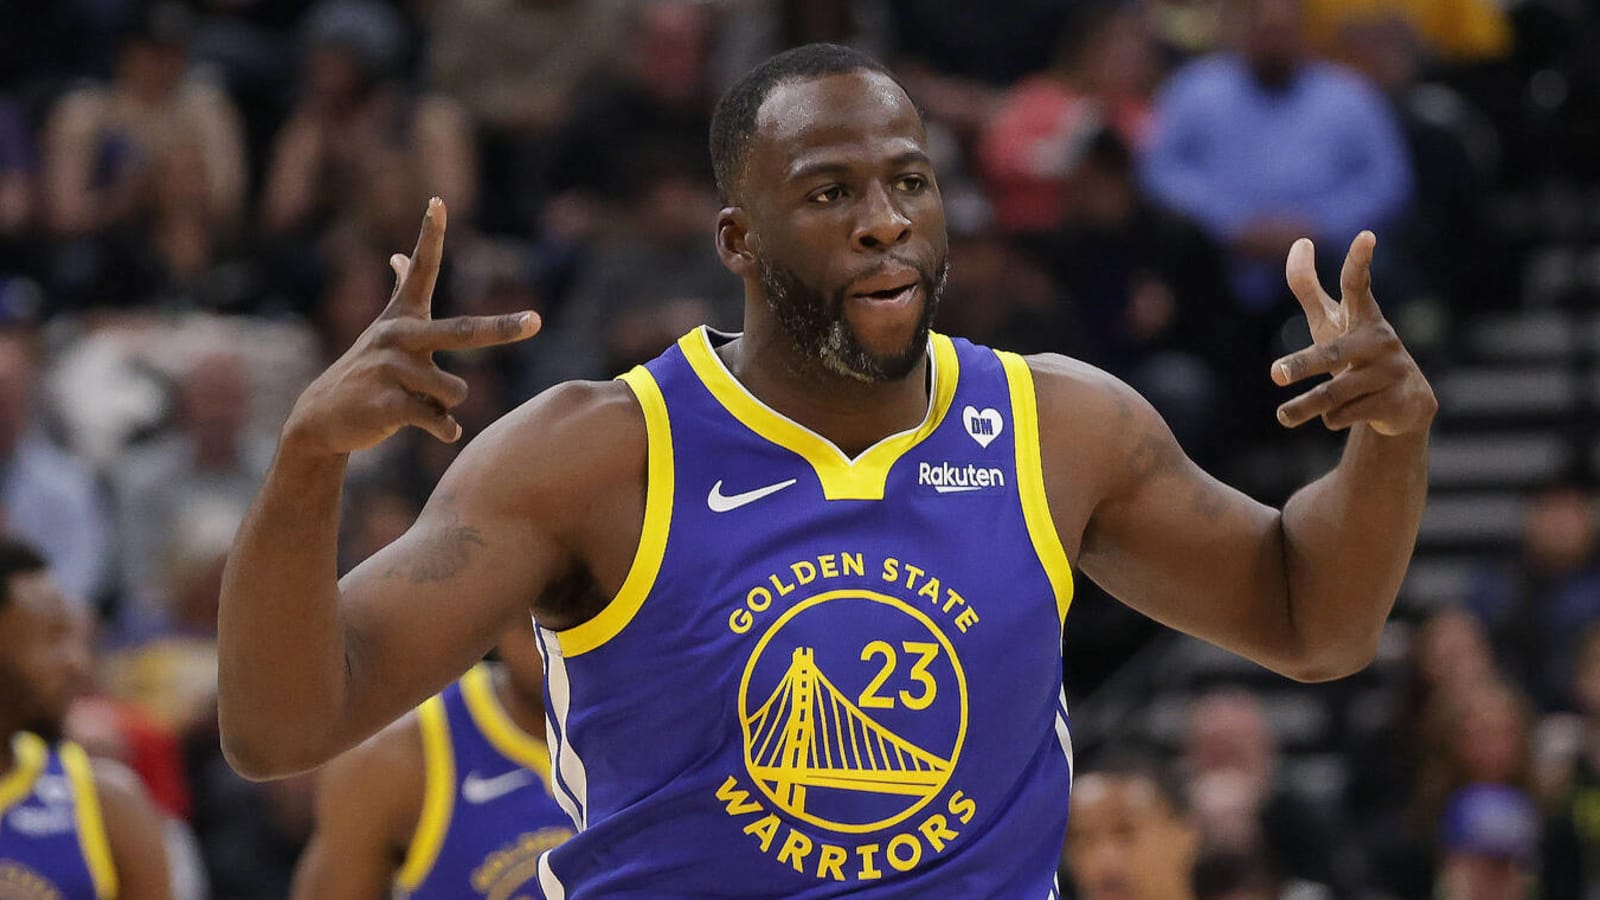 Draymond schemed to bring Kevin Durant to the Warriors earlier than expected